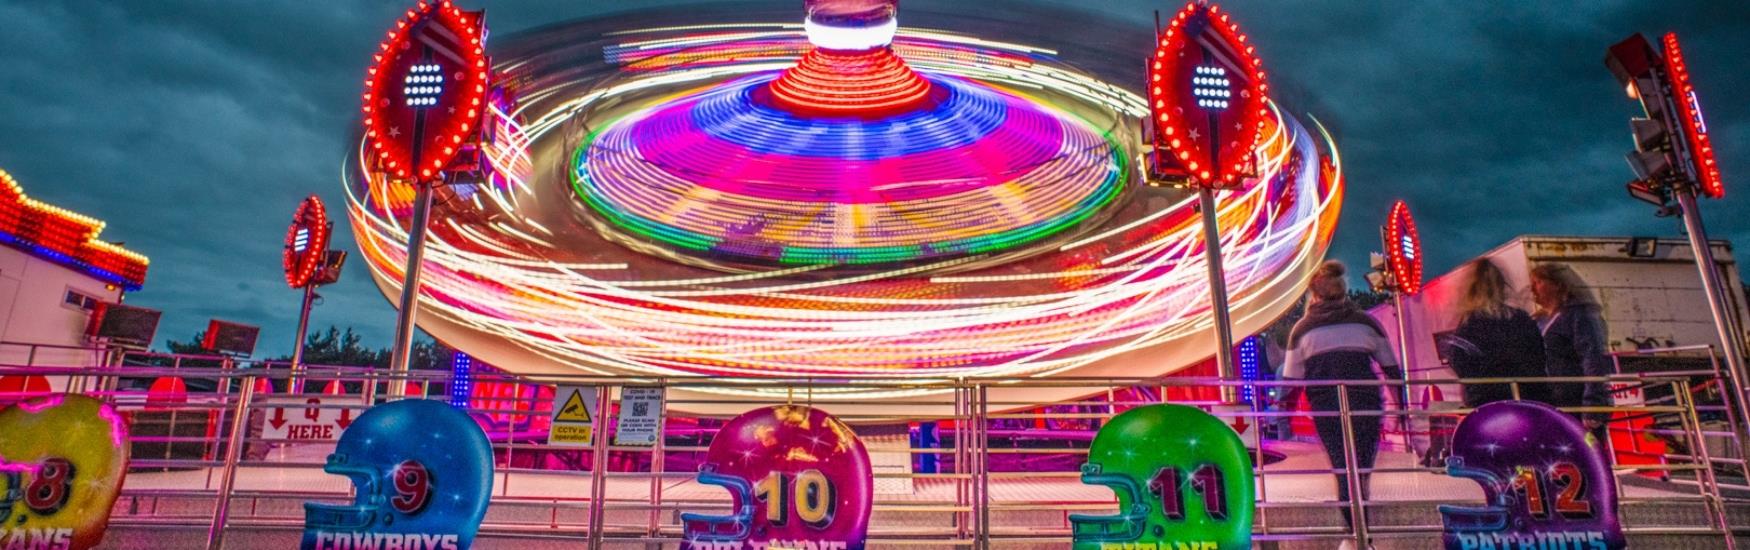 Neon lights illuminate the spinning ride at the funfair in Bournemouth